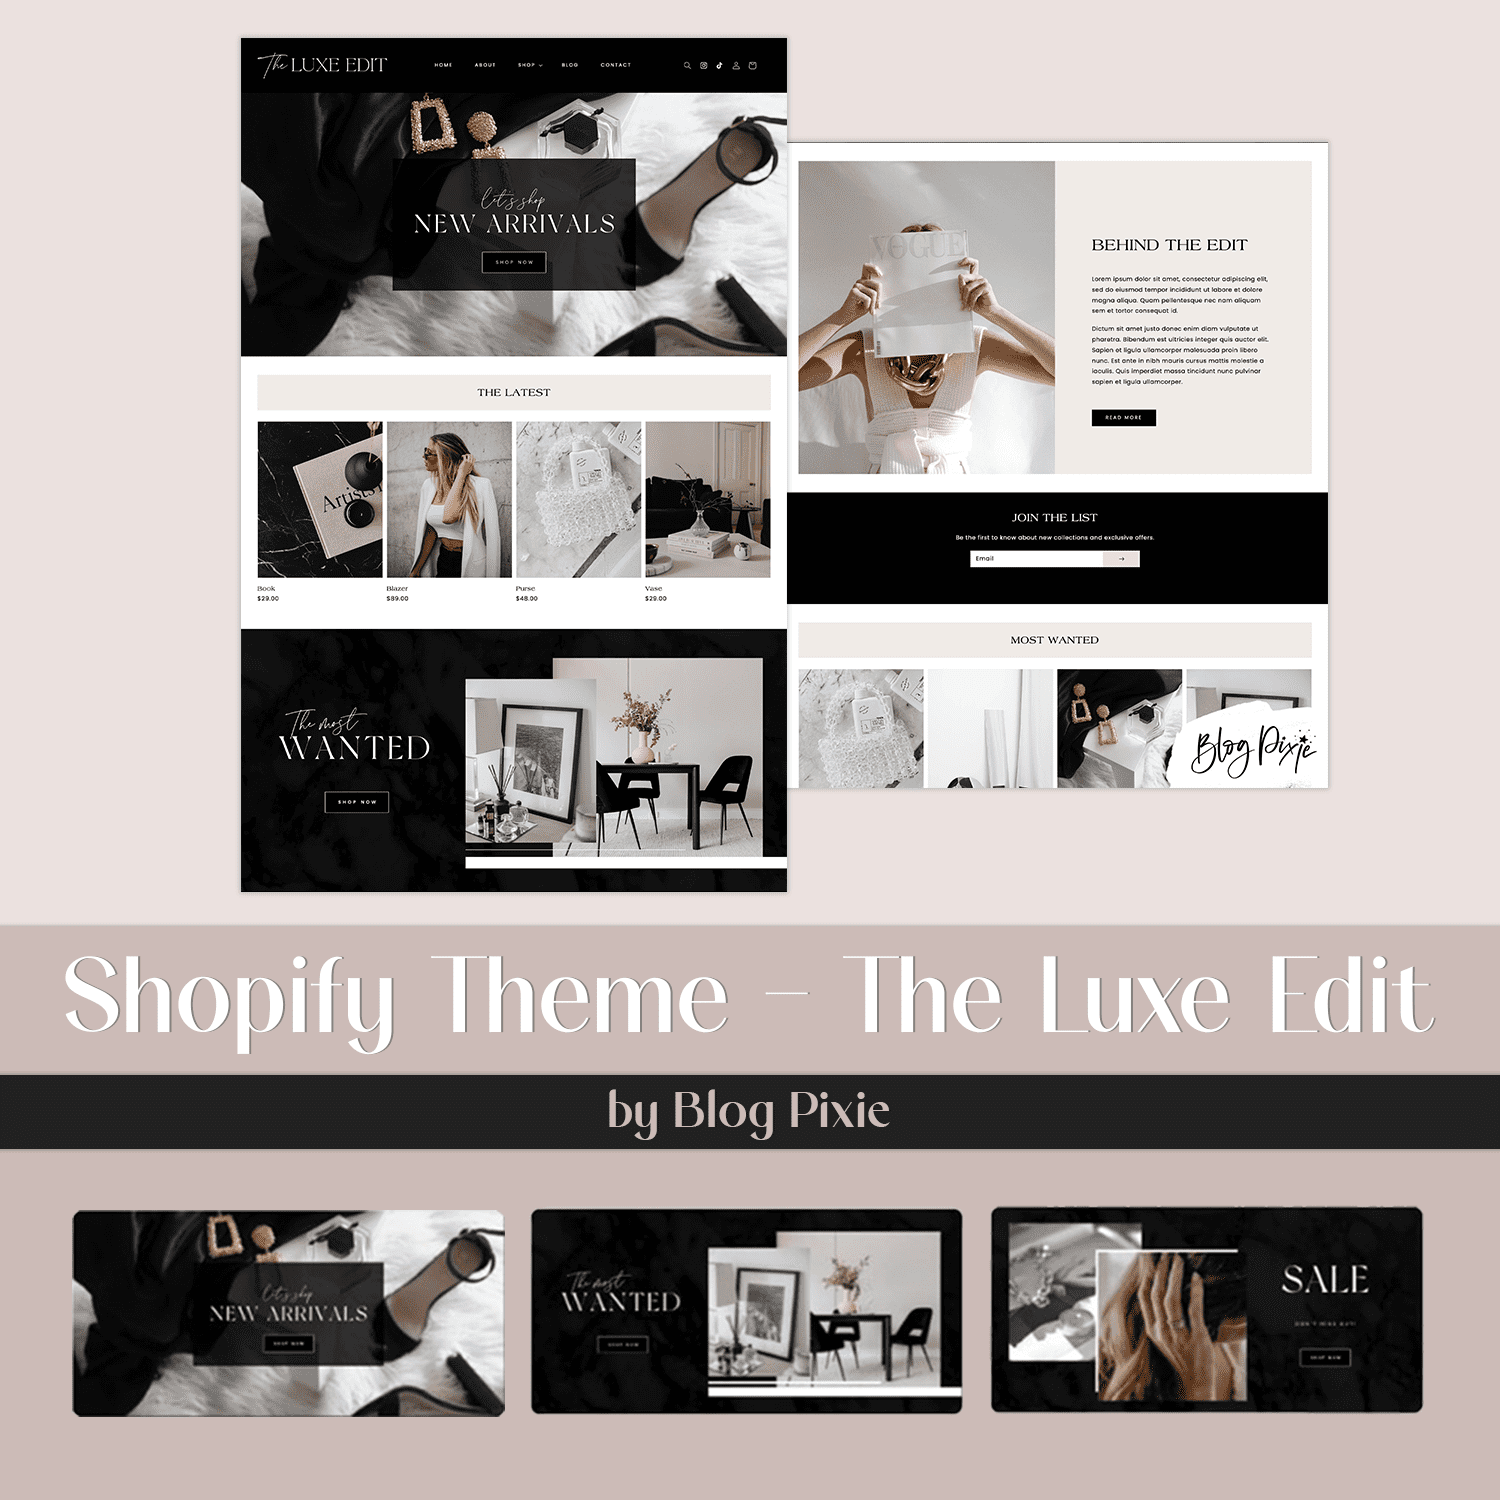 A set of page images of an adorable Shopify theme.